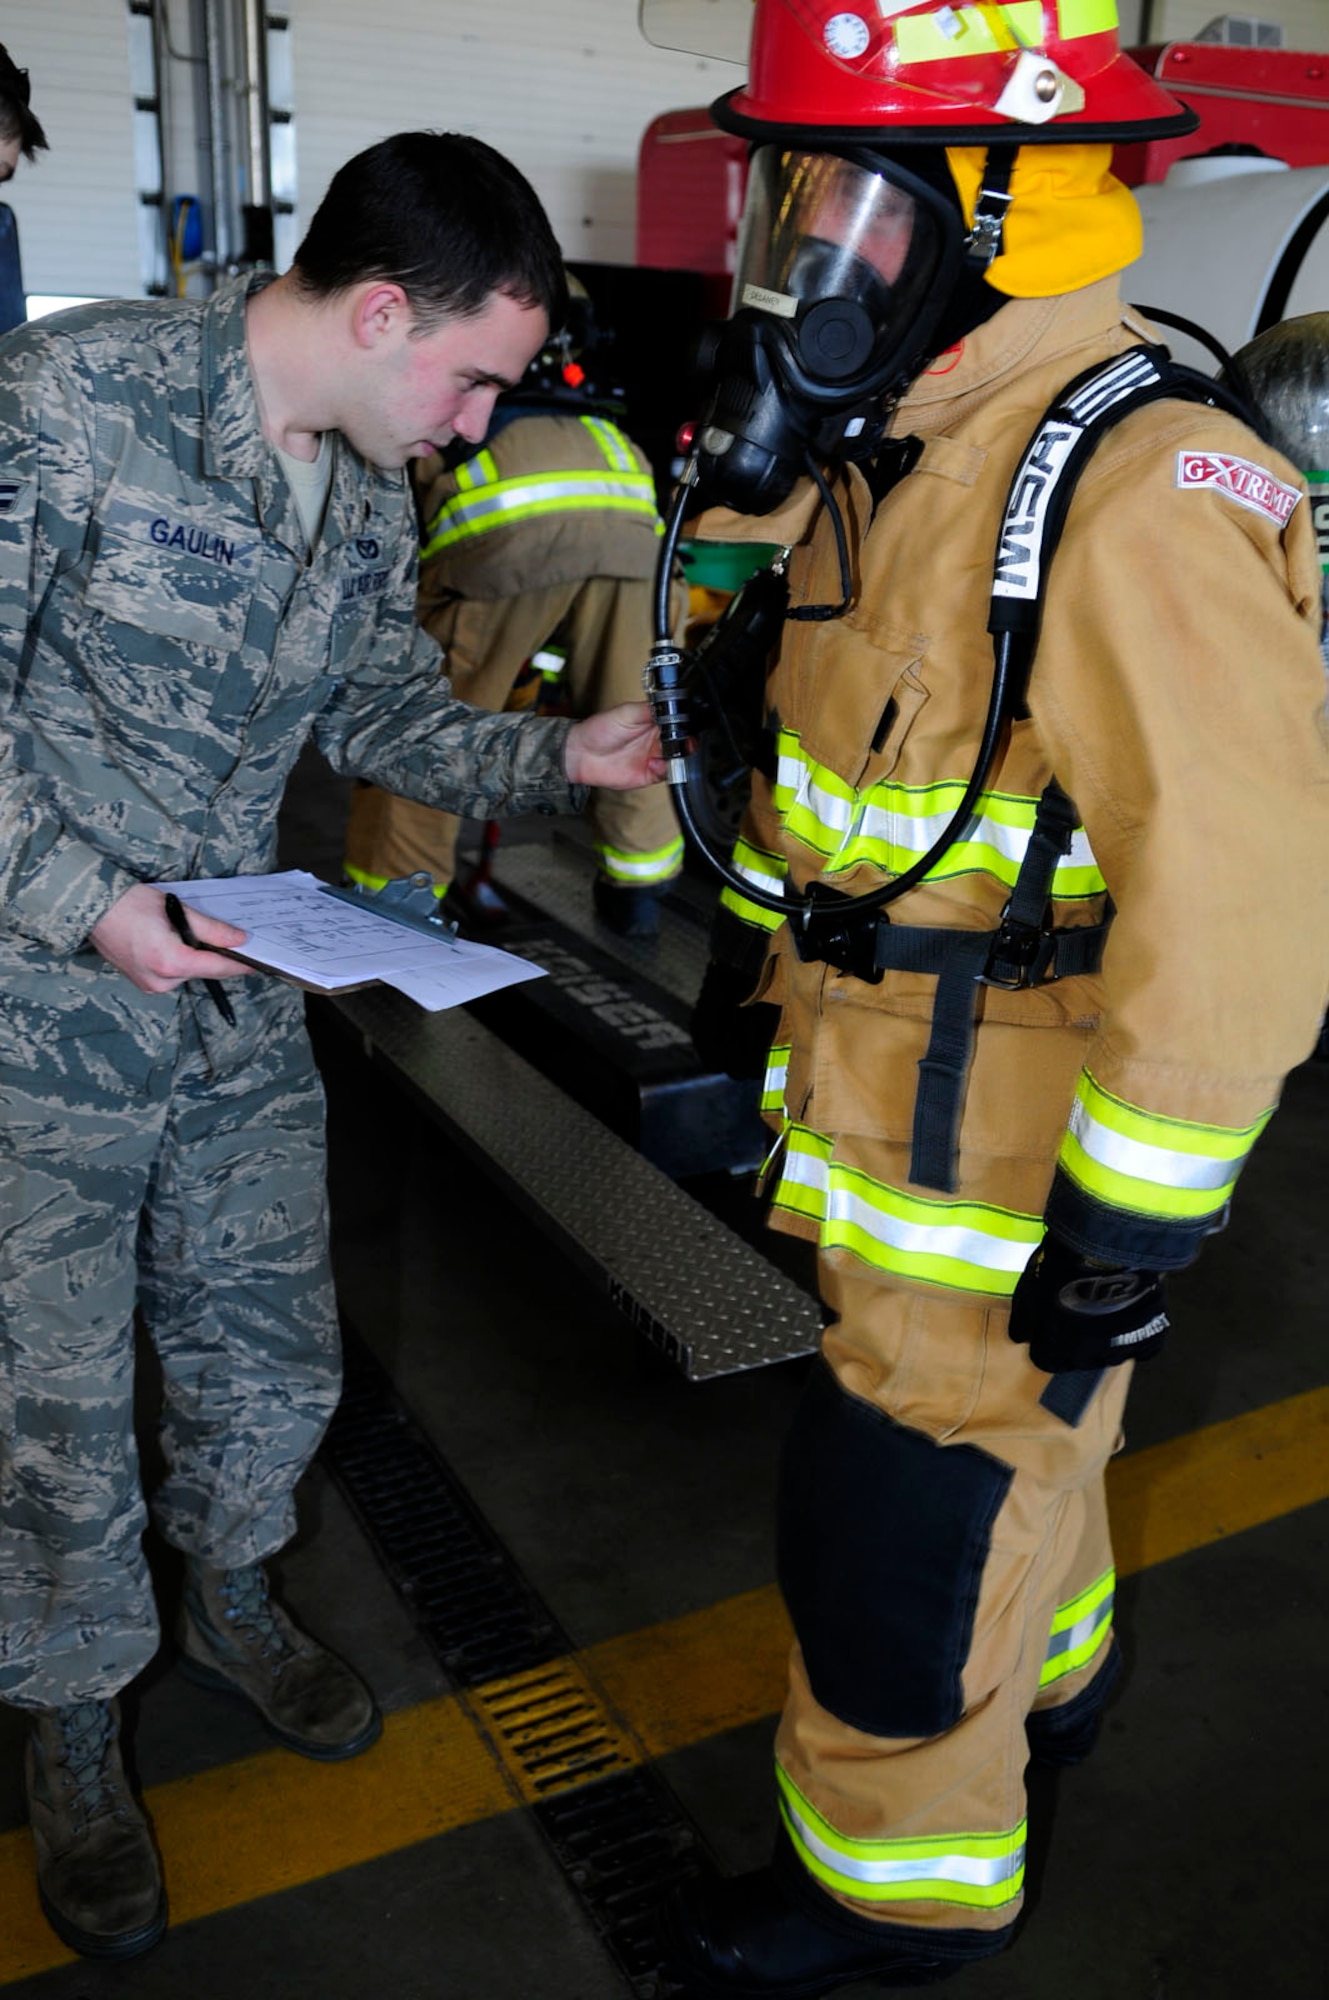 U.S. Air Force Airman 1st Class Christopher Gaulin, left, 100th Civil Engineer Squadron Fire Department firefighter from Hudson, Mass., checks the oxygen monitor on the self-contained breathing apparatus of Watch Manager Adrian Delaney, 100th CES Fire Department firefighter from Elmswell, Suffolk, April 14, 2014, during SCBA training on RAF Mildenhall, England. To comply with safety regulations, RAF Mildenhall's firefighters perform annual respiratory protection training, which ensures their SCBA equipment is constantly working and ready to go, and they know signs to look for when their oxygen is getting low. (U.S. Air Force photo by Karen Abeyasekere/Released)